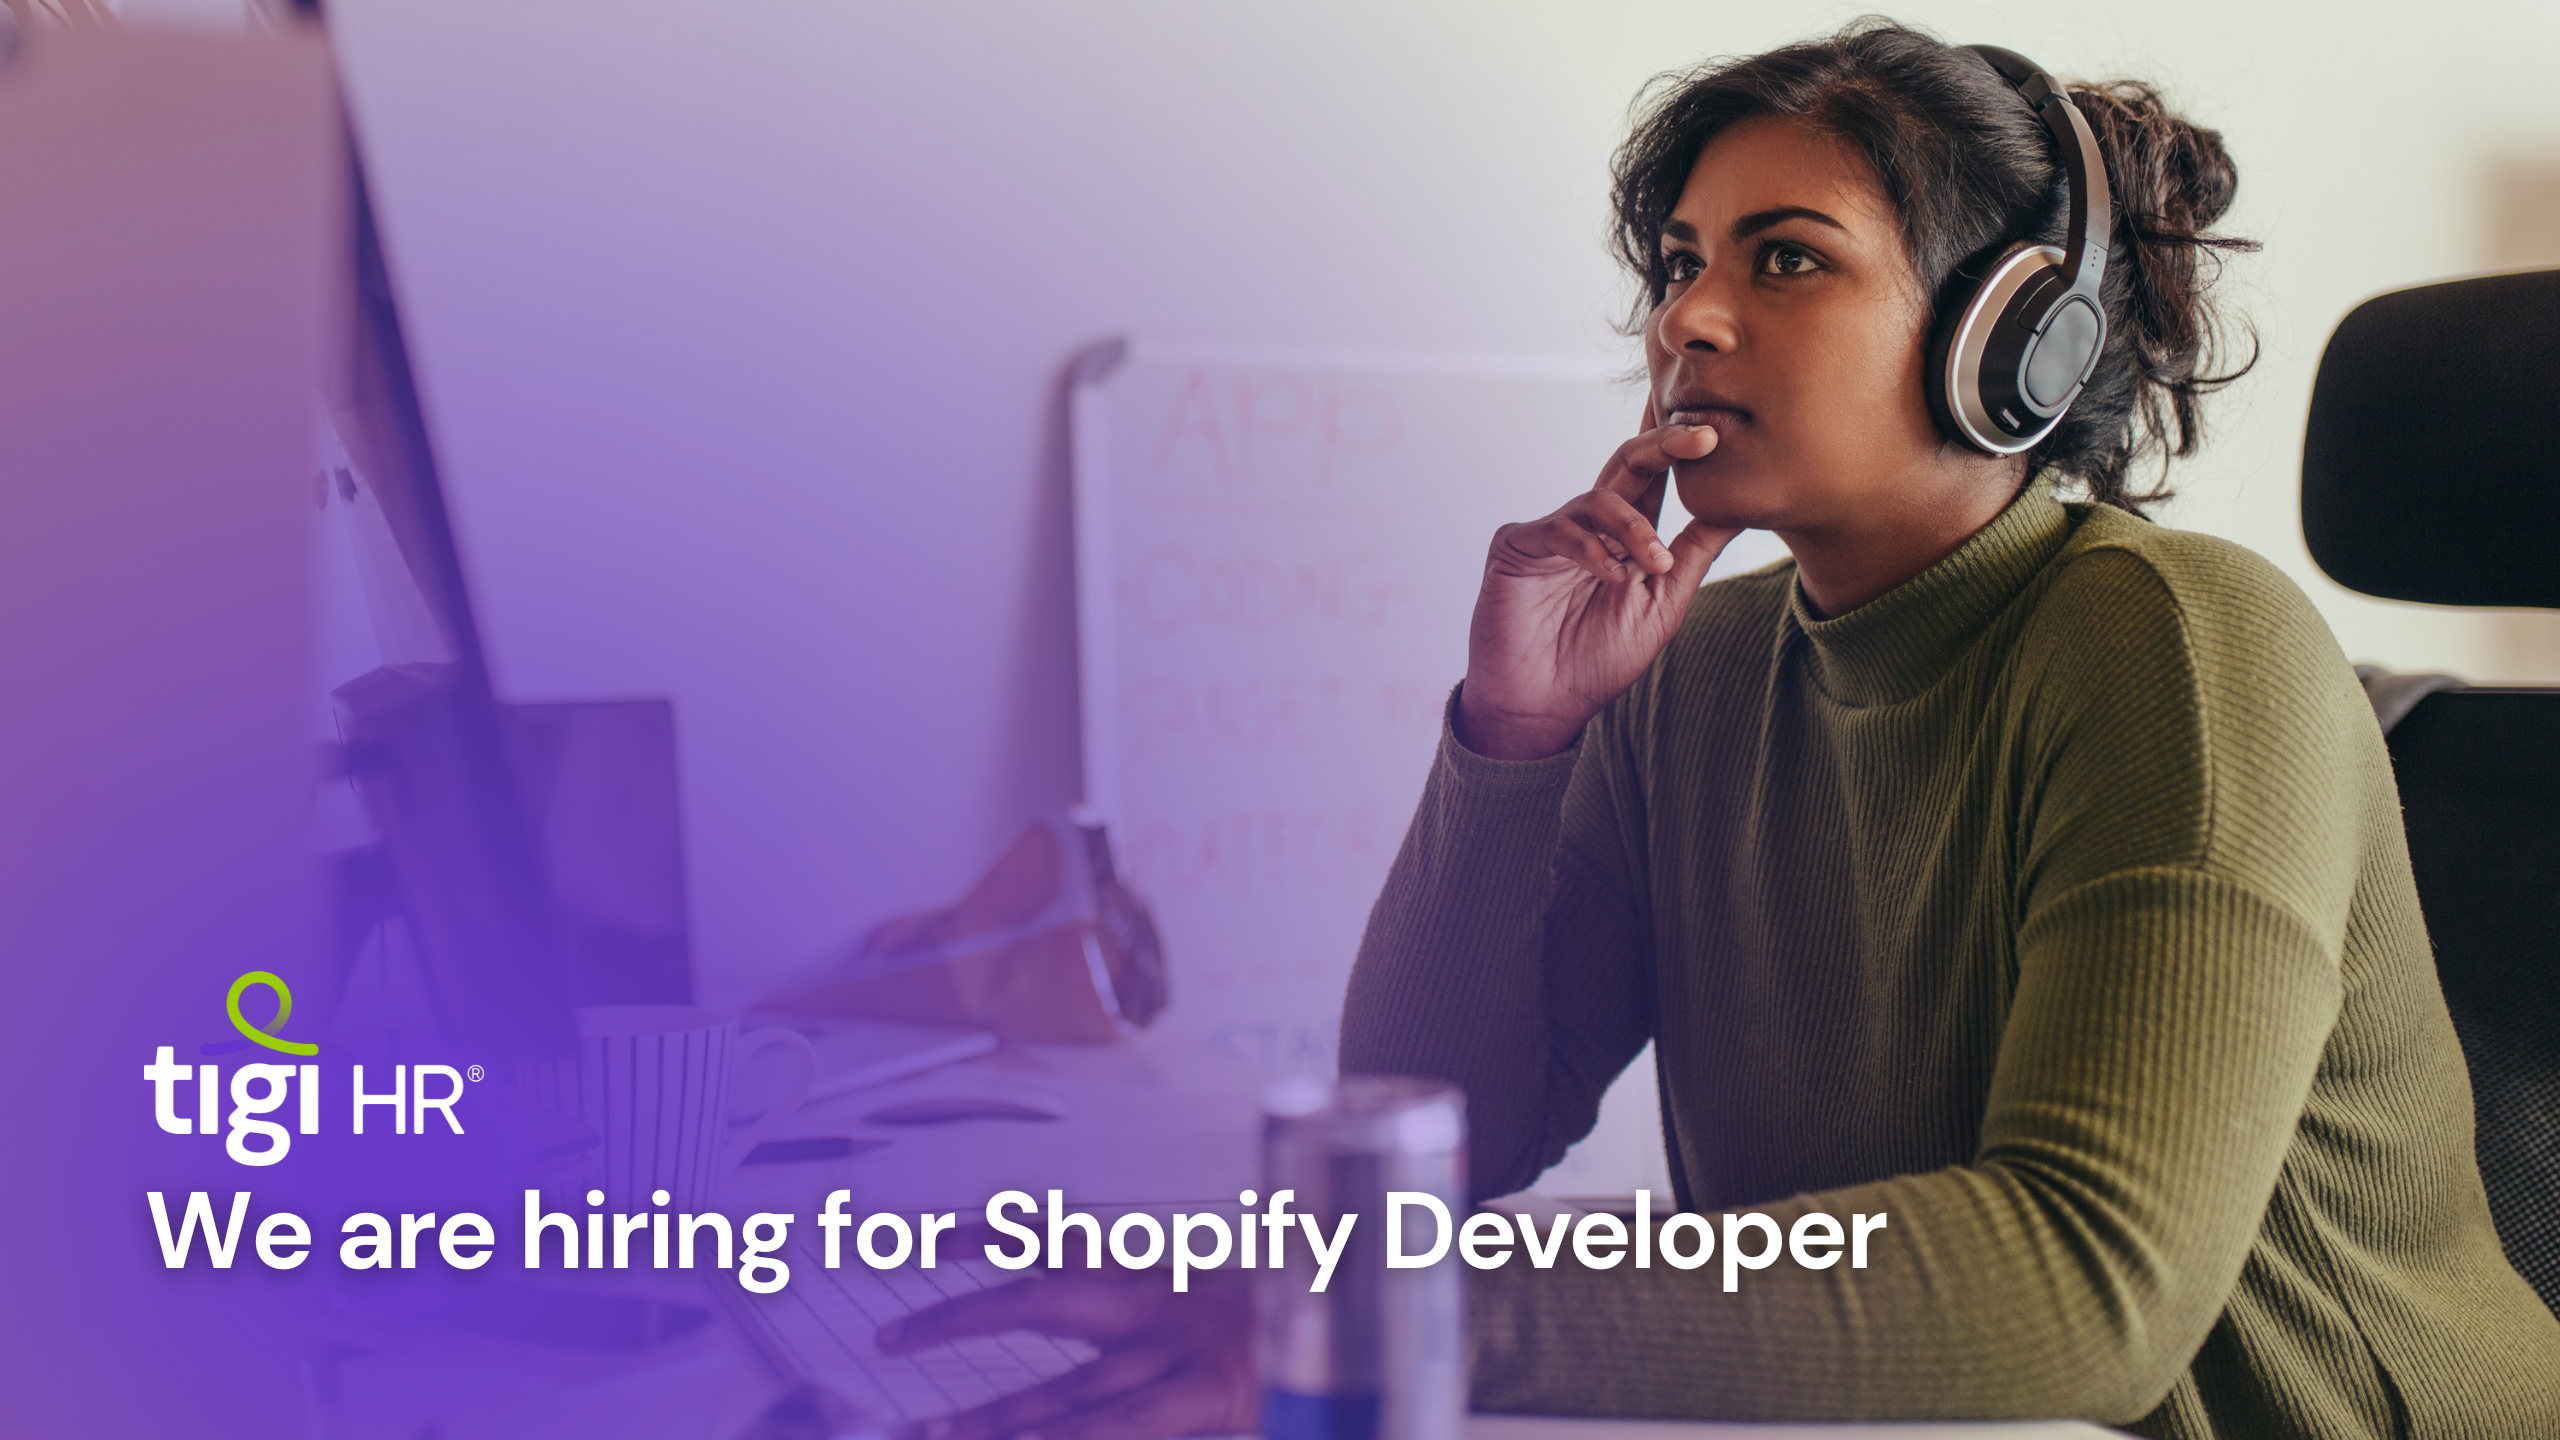 We are hiring for Shopify Developer. Find jobs for Shopify Developer.